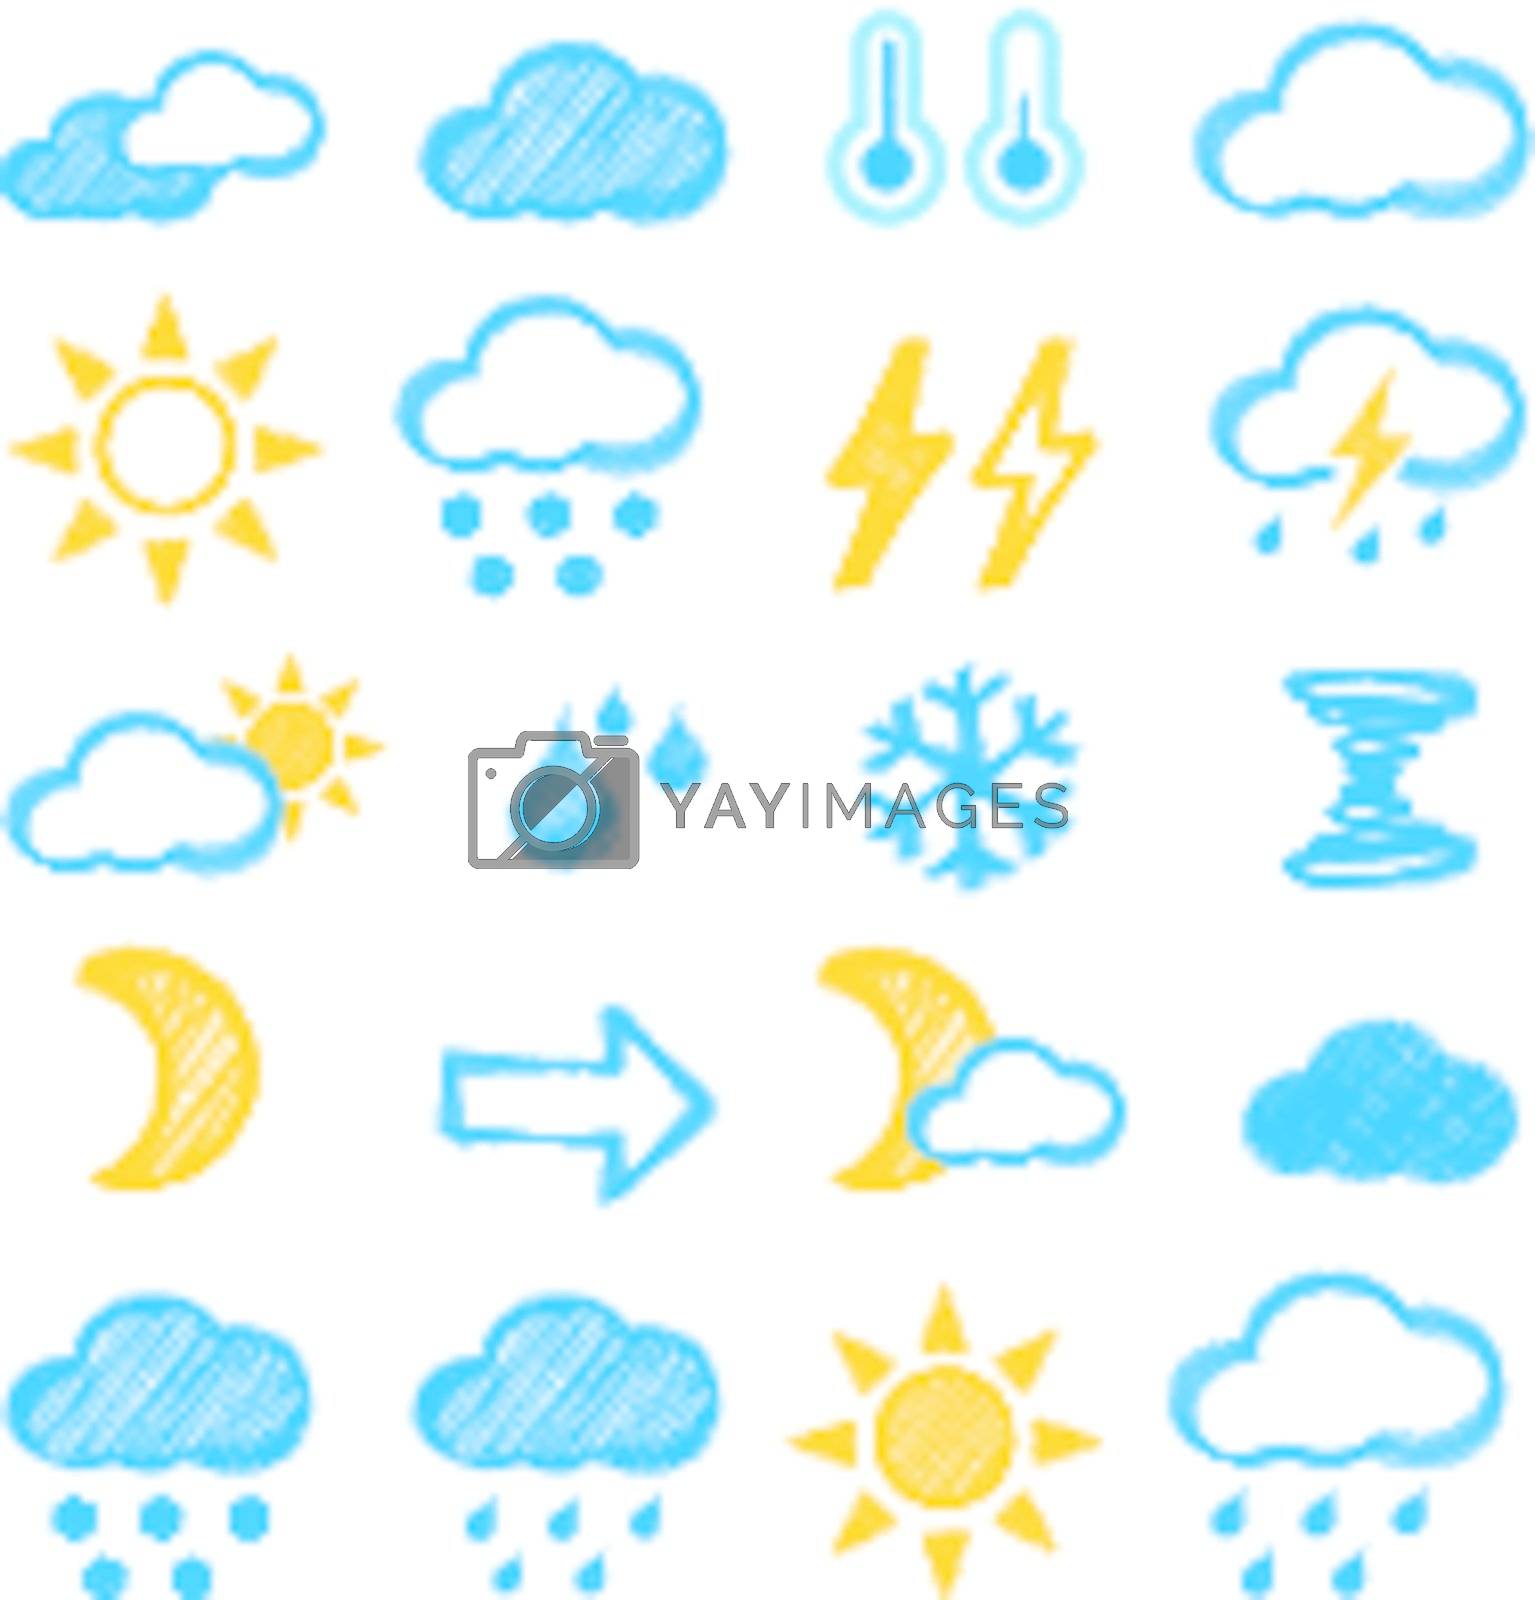 Royalty free image of Weather icon by sermax55